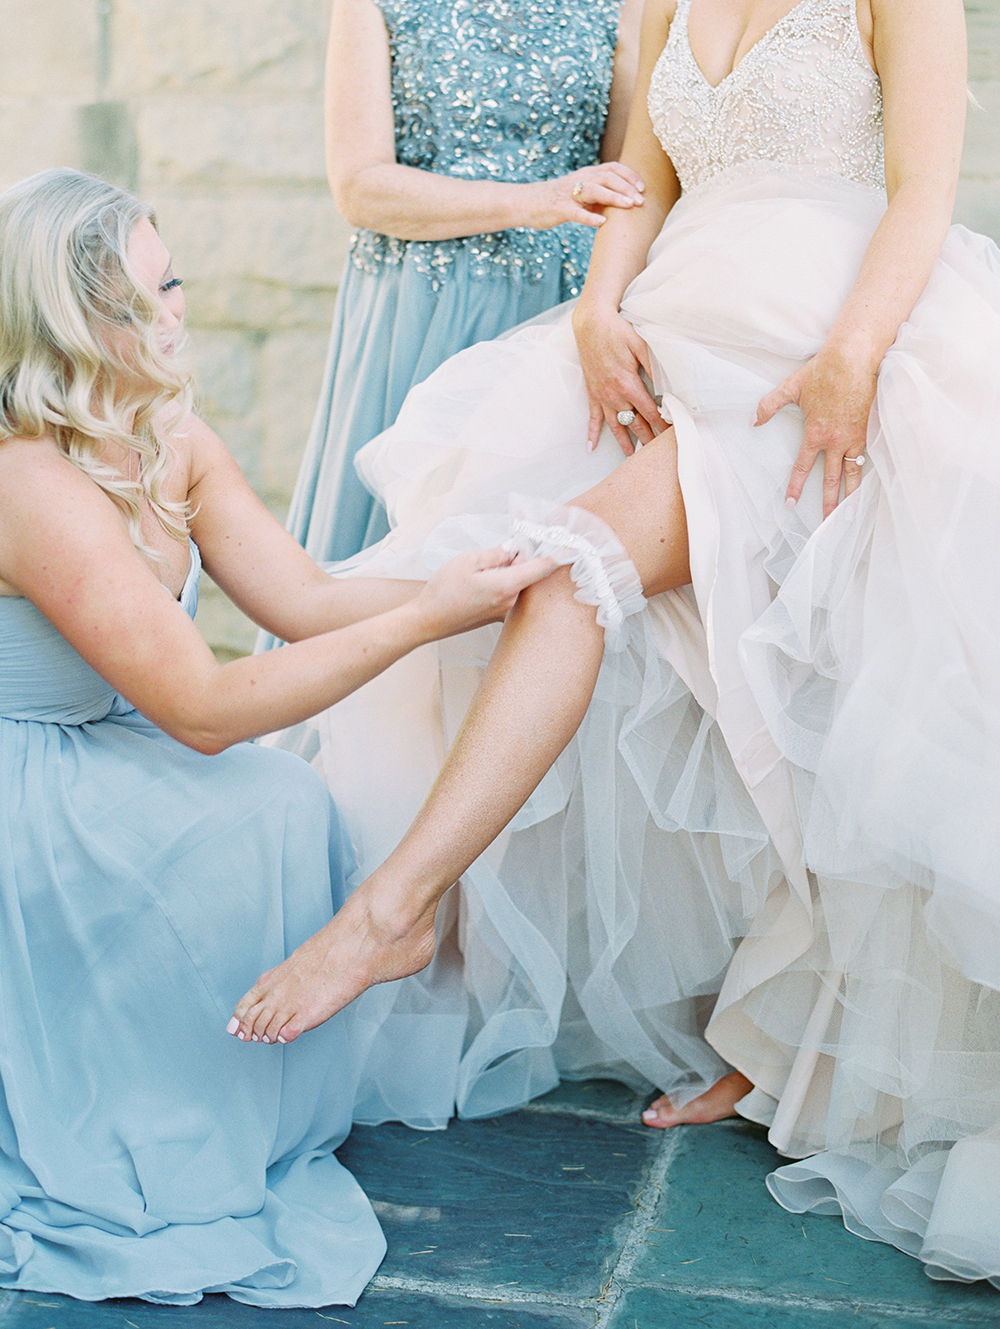 Romantic and Classic Greystone Mansion Wedding by Lucky Day Events Co. x Jordan Galindo Photograph // White Lace Garter